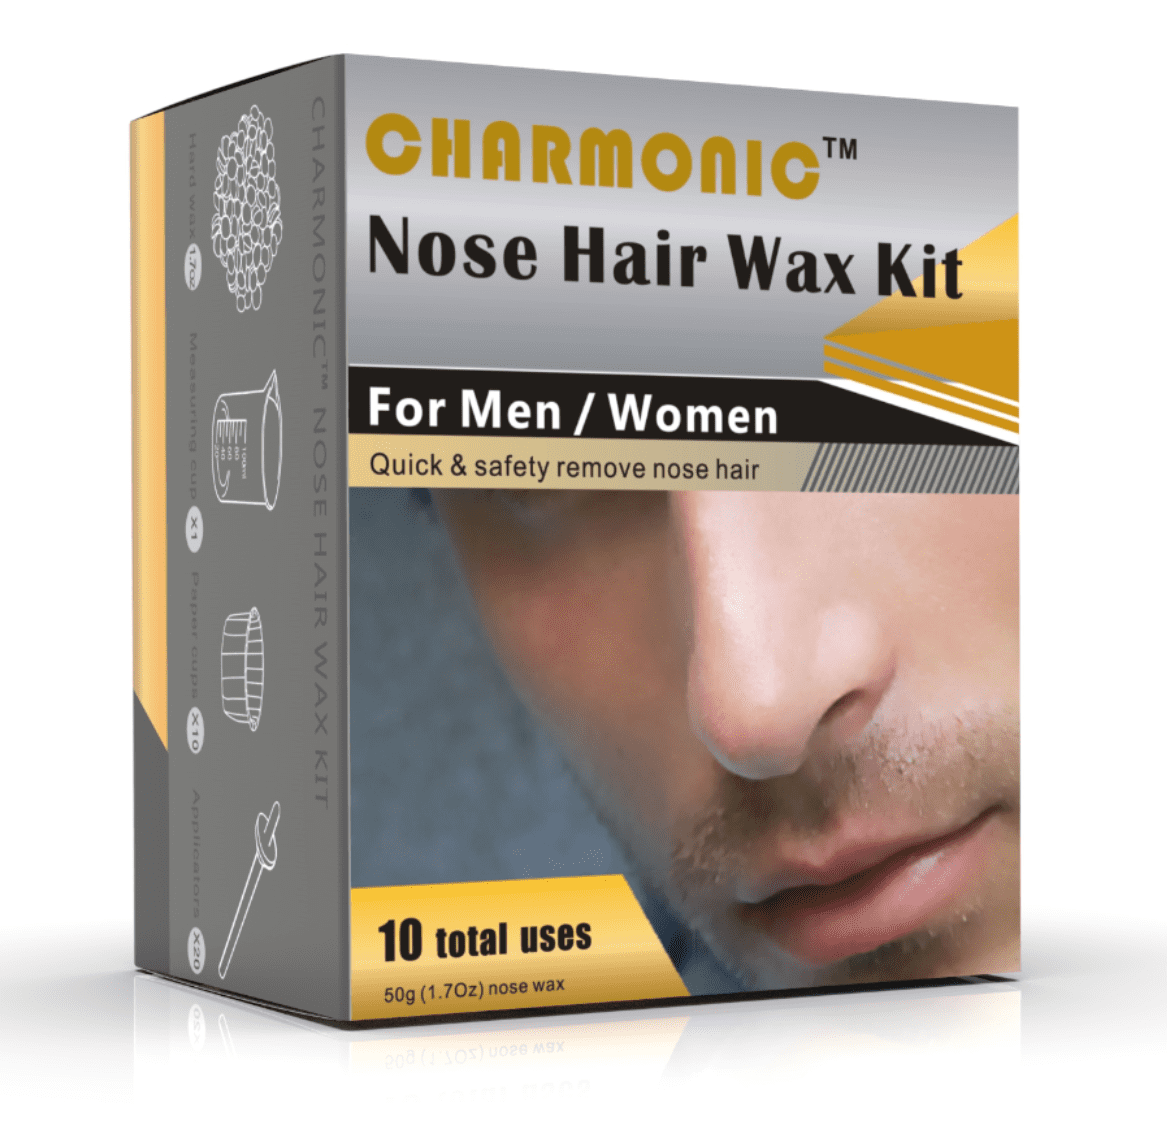 Charmonic 1.76oz/50g Nose Wax Kit for Men and Women, Quick & Painless ...